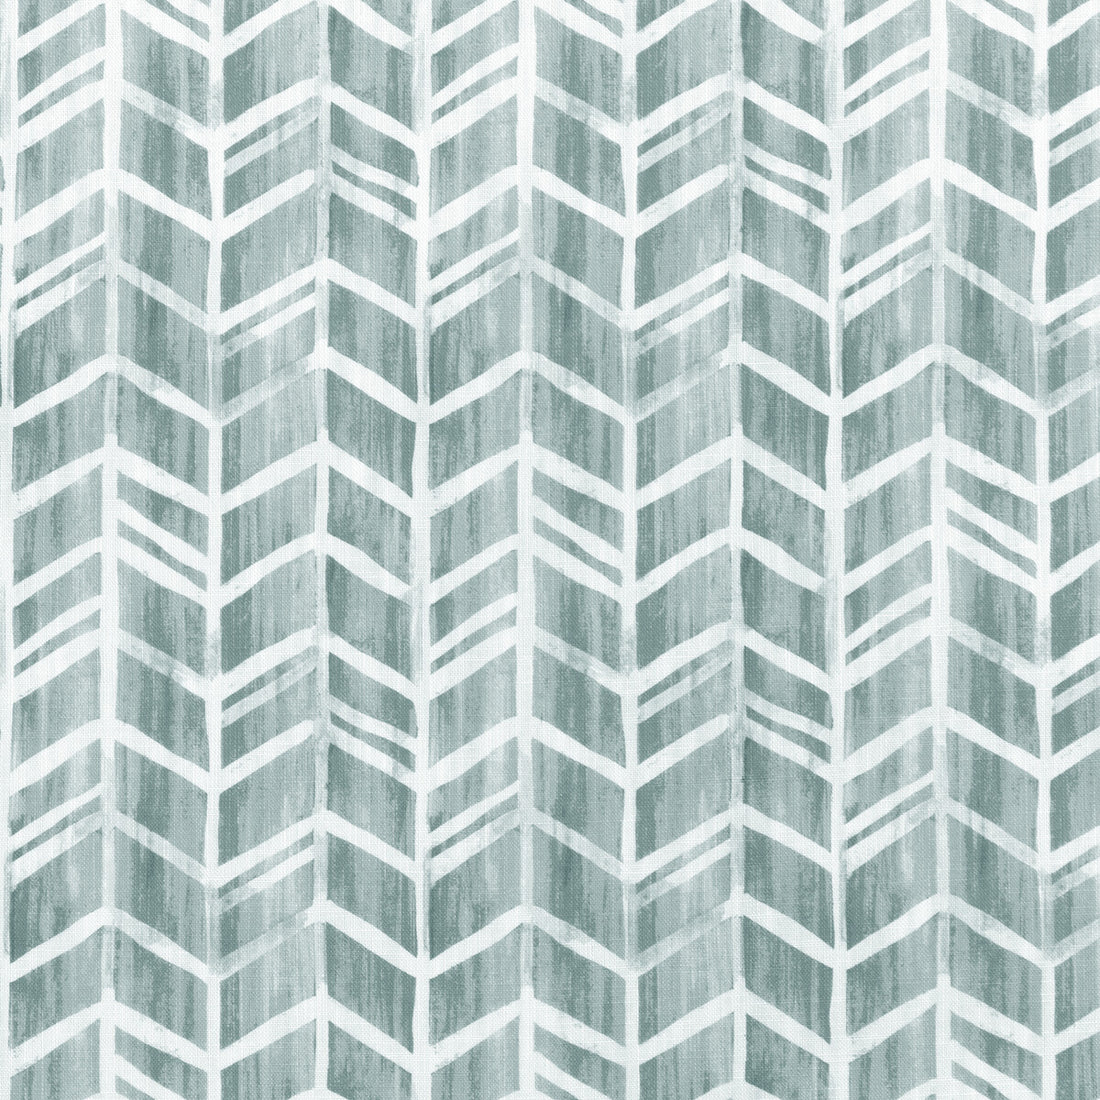 Dont Fret fabric in graphite color - pattern DONT FRET.1101.0 - by Kravet Basics in the Small Scale Prints collection